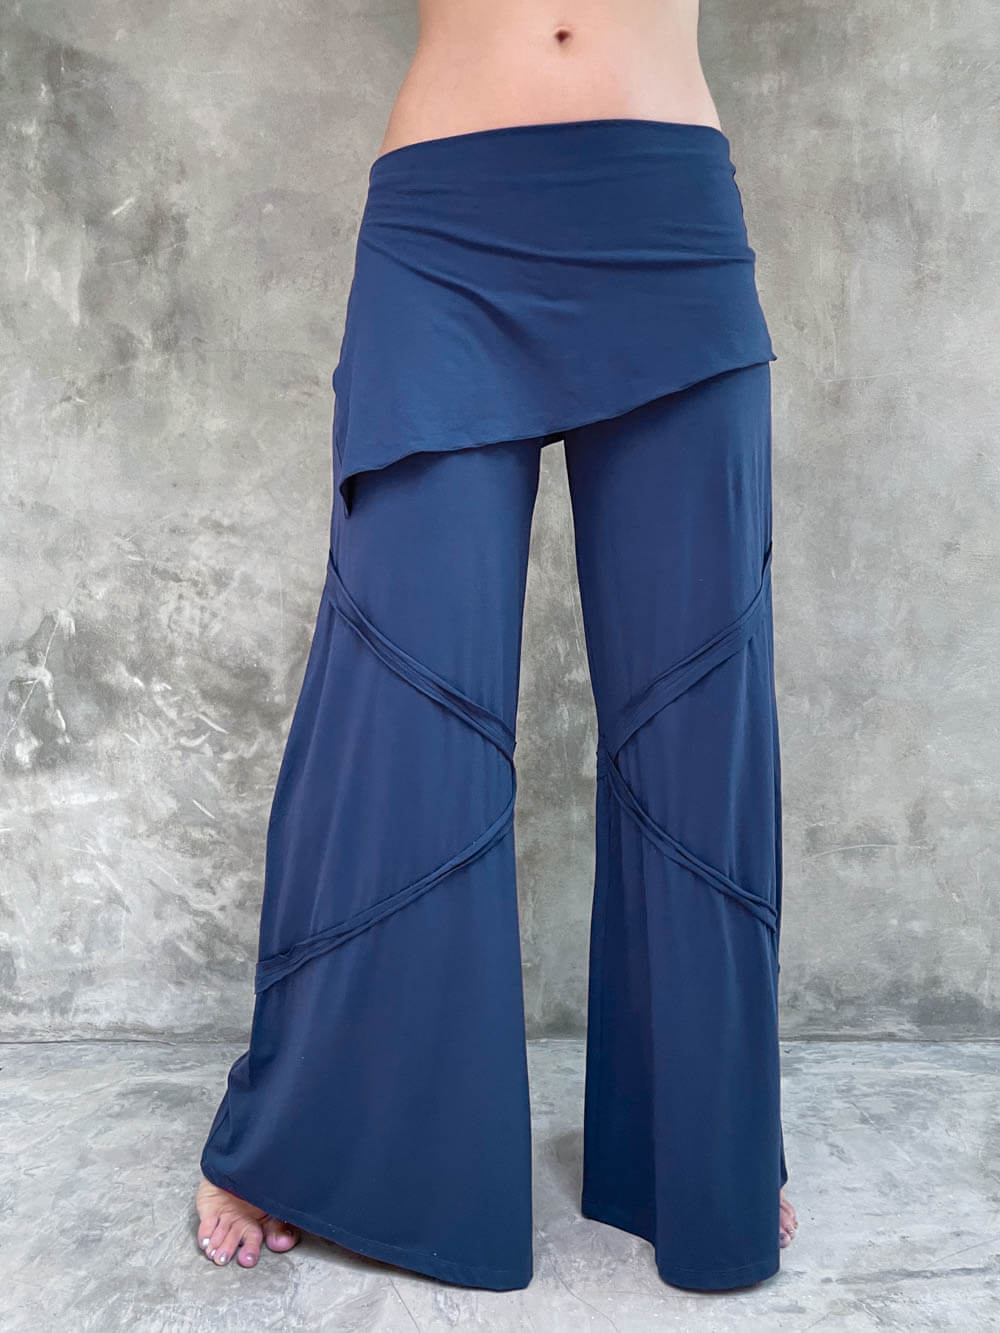 women's natural rayon jersey skirt-over navy blue wide leg pants with raised diagonal stitching #color_navy